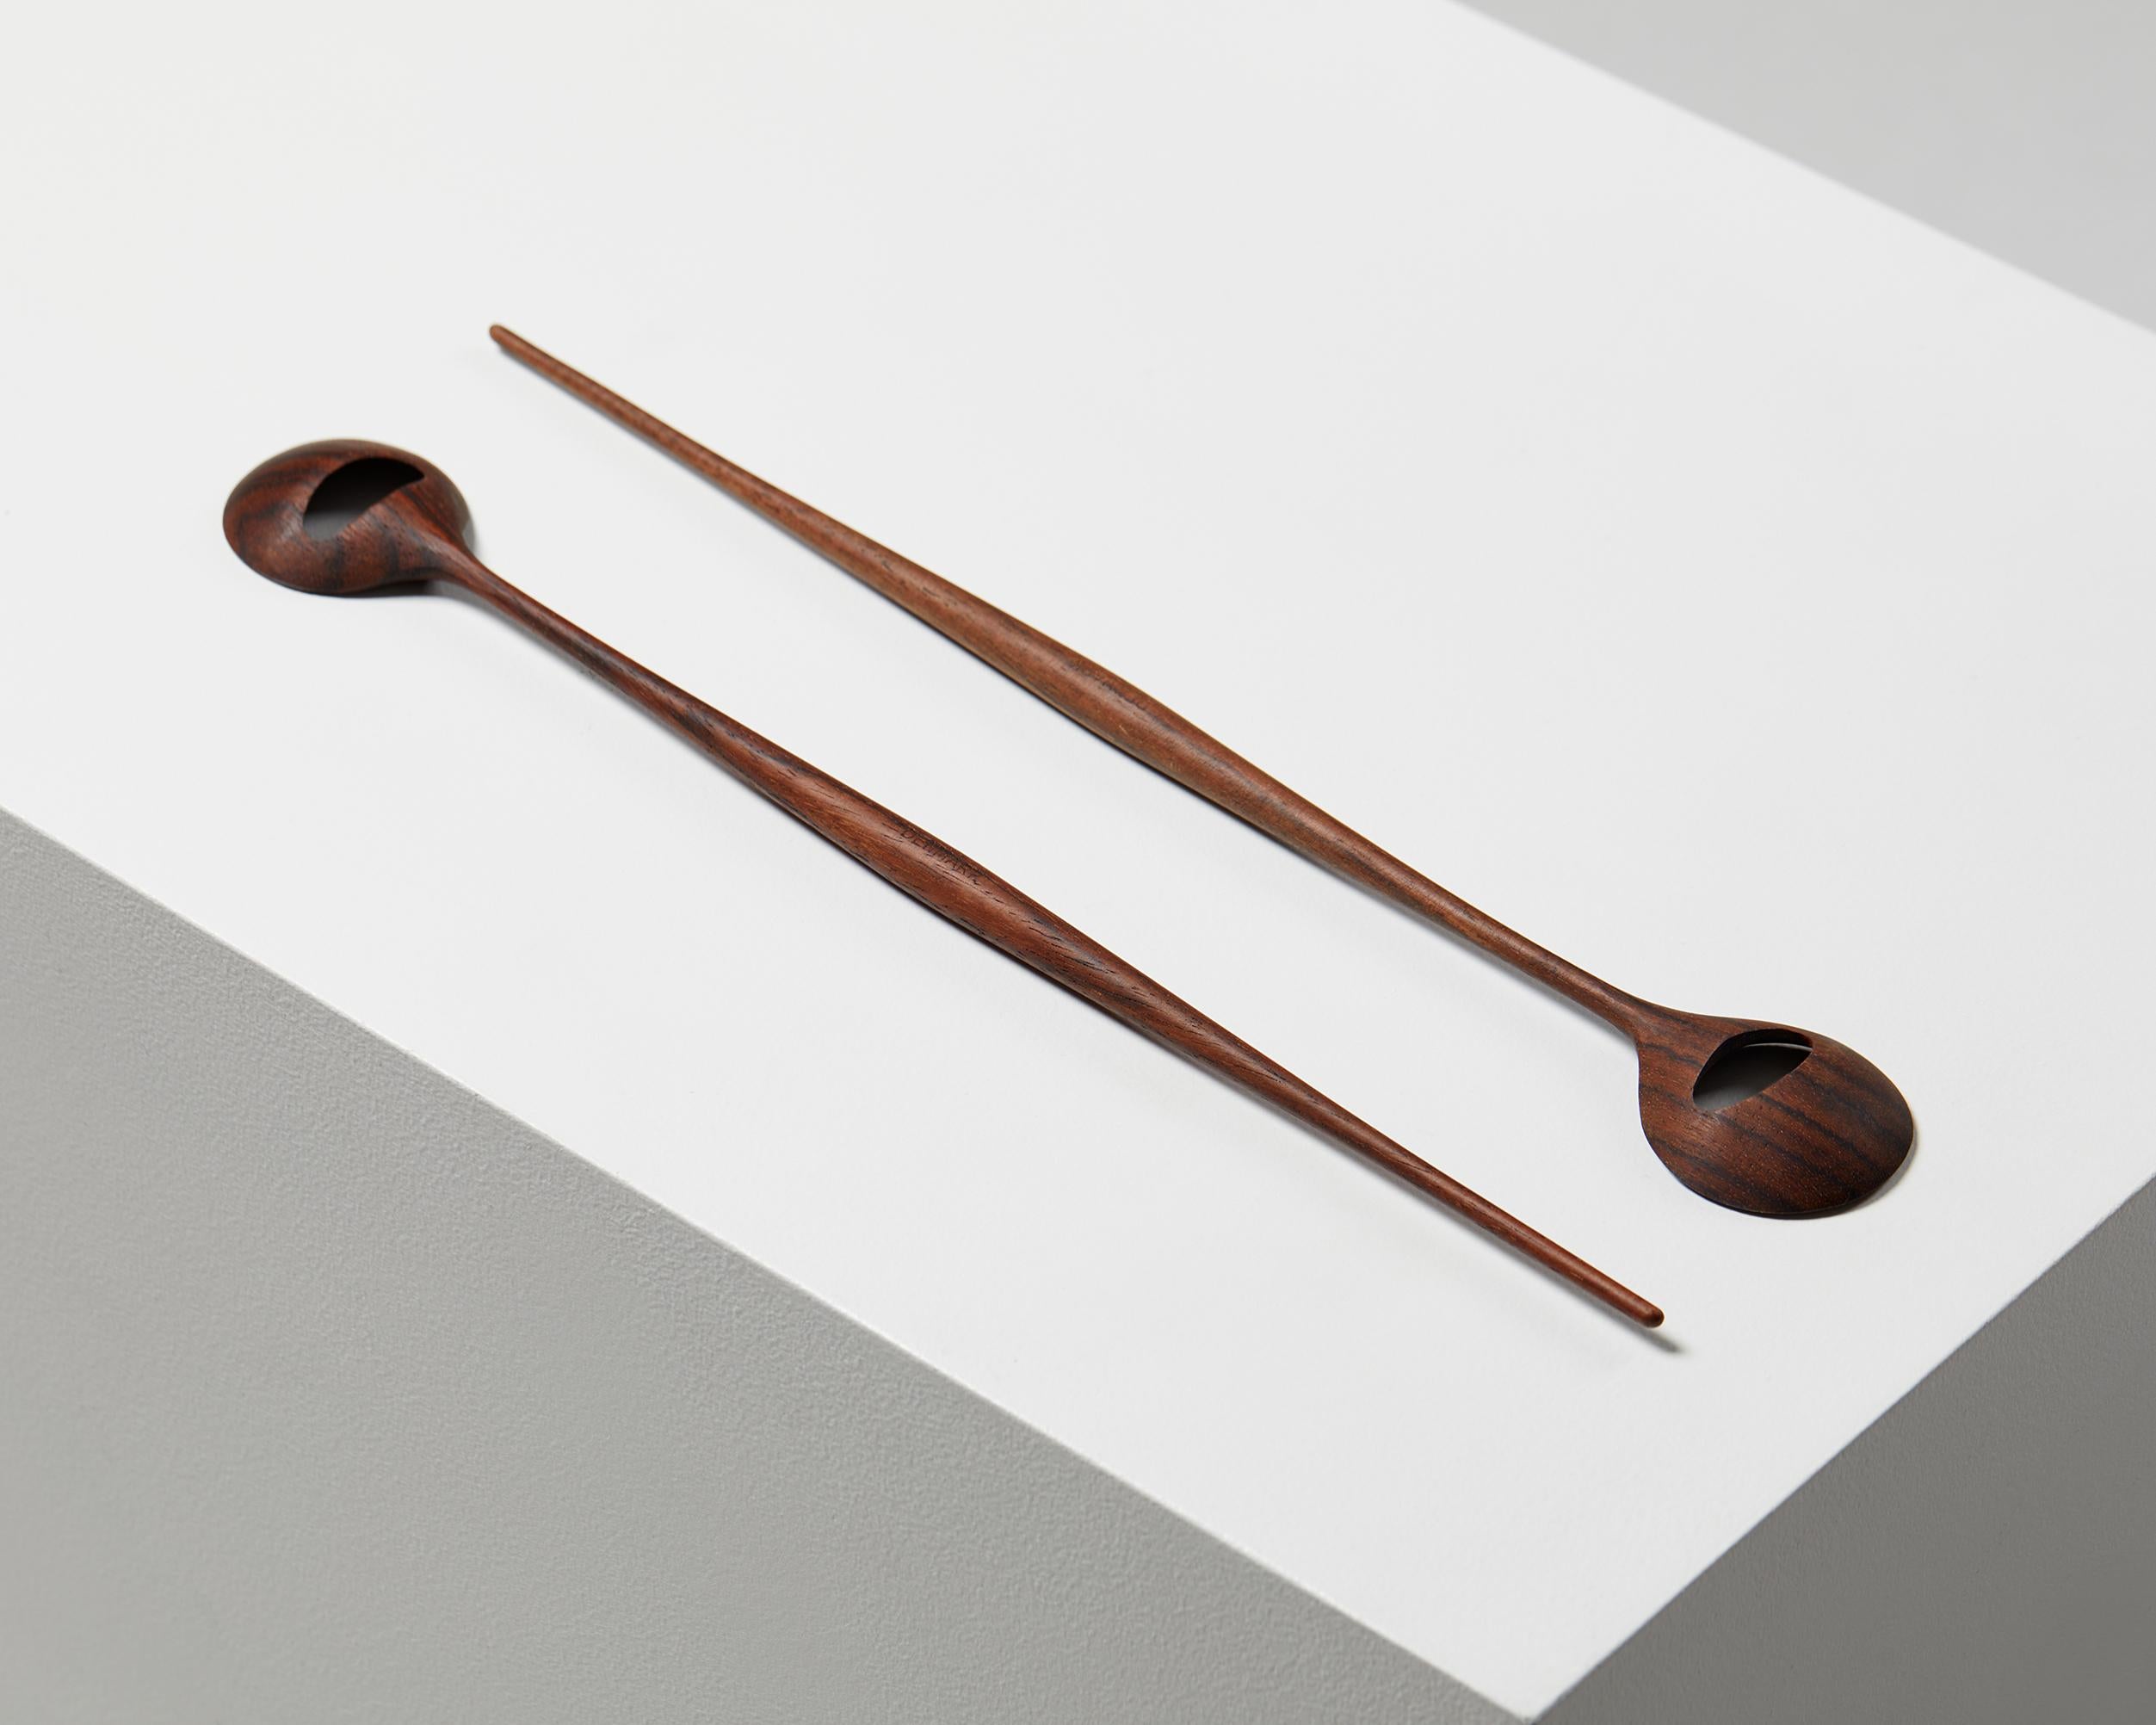 20th Century Pair of Serving Spoons, Made by Magne Monsen, Denmark, 1950s